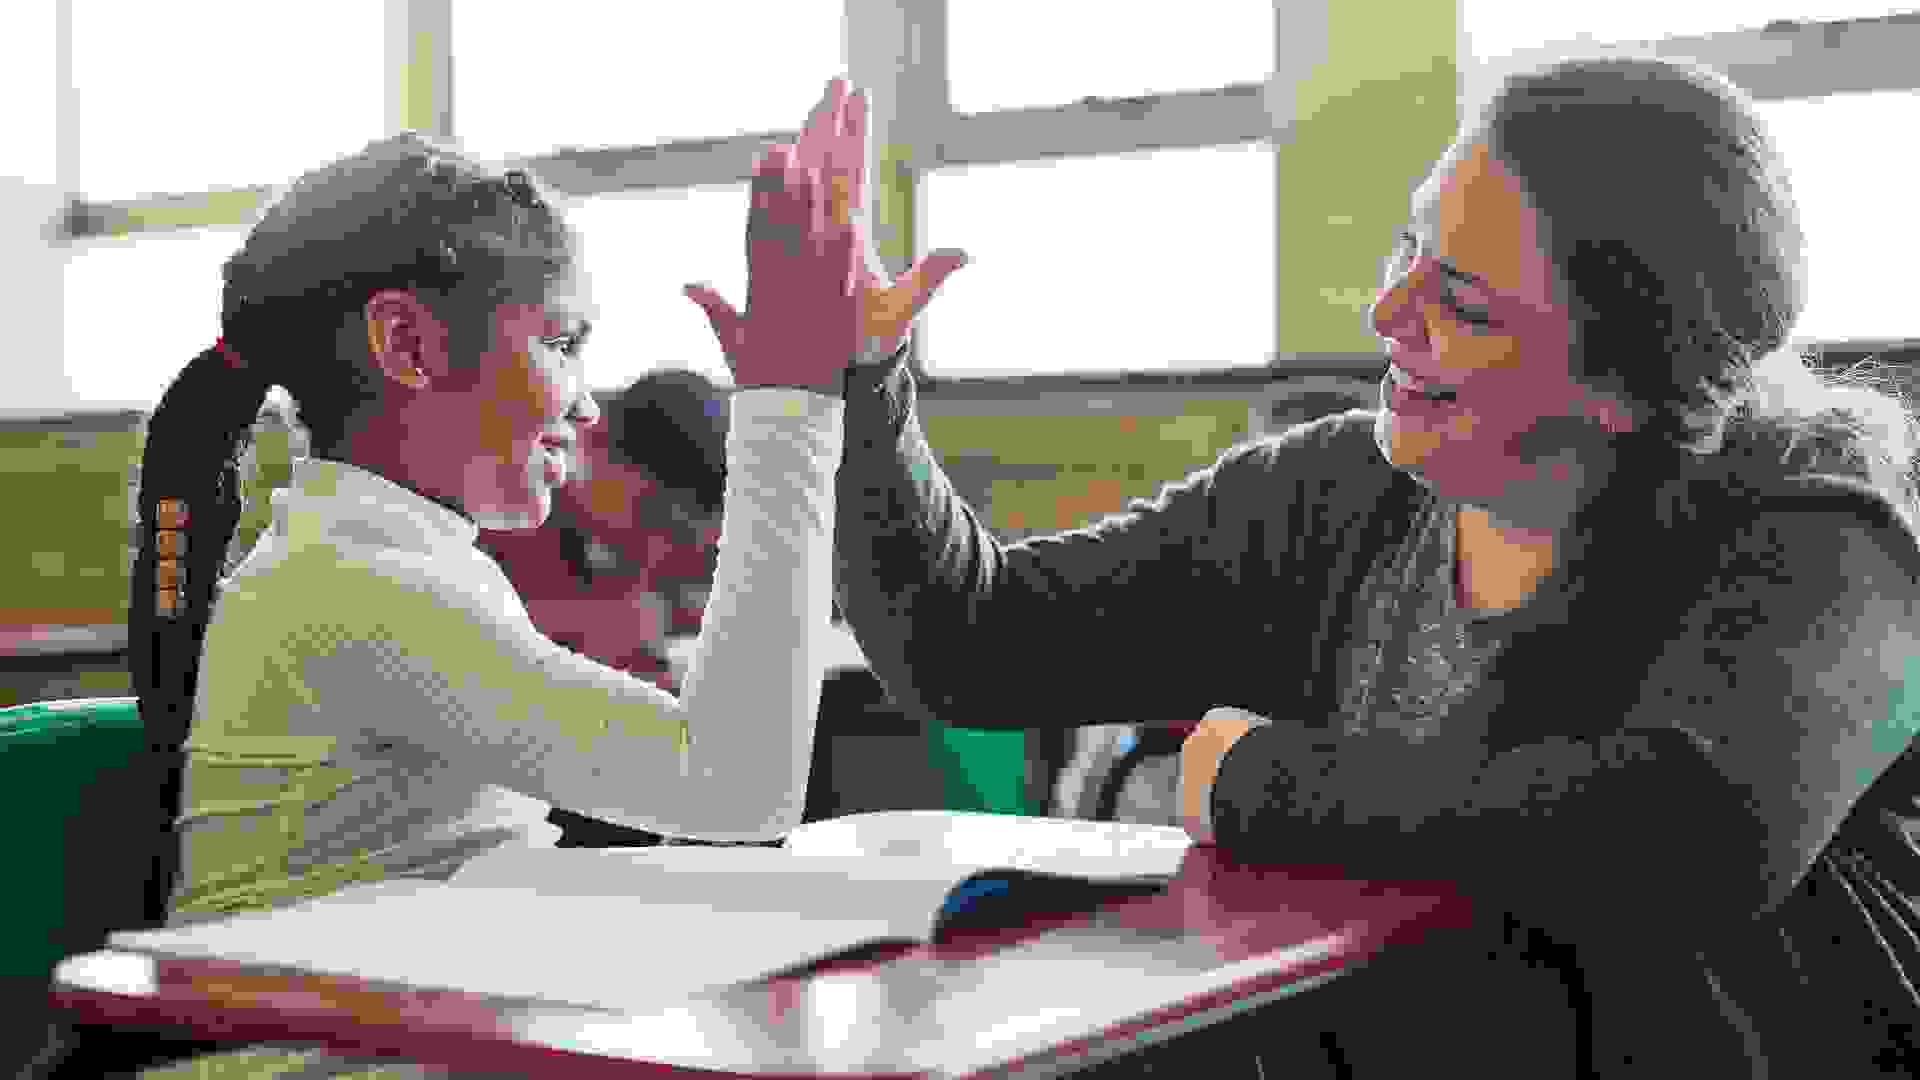 Shot of a young girl giving her teacher a high five in a classroom.